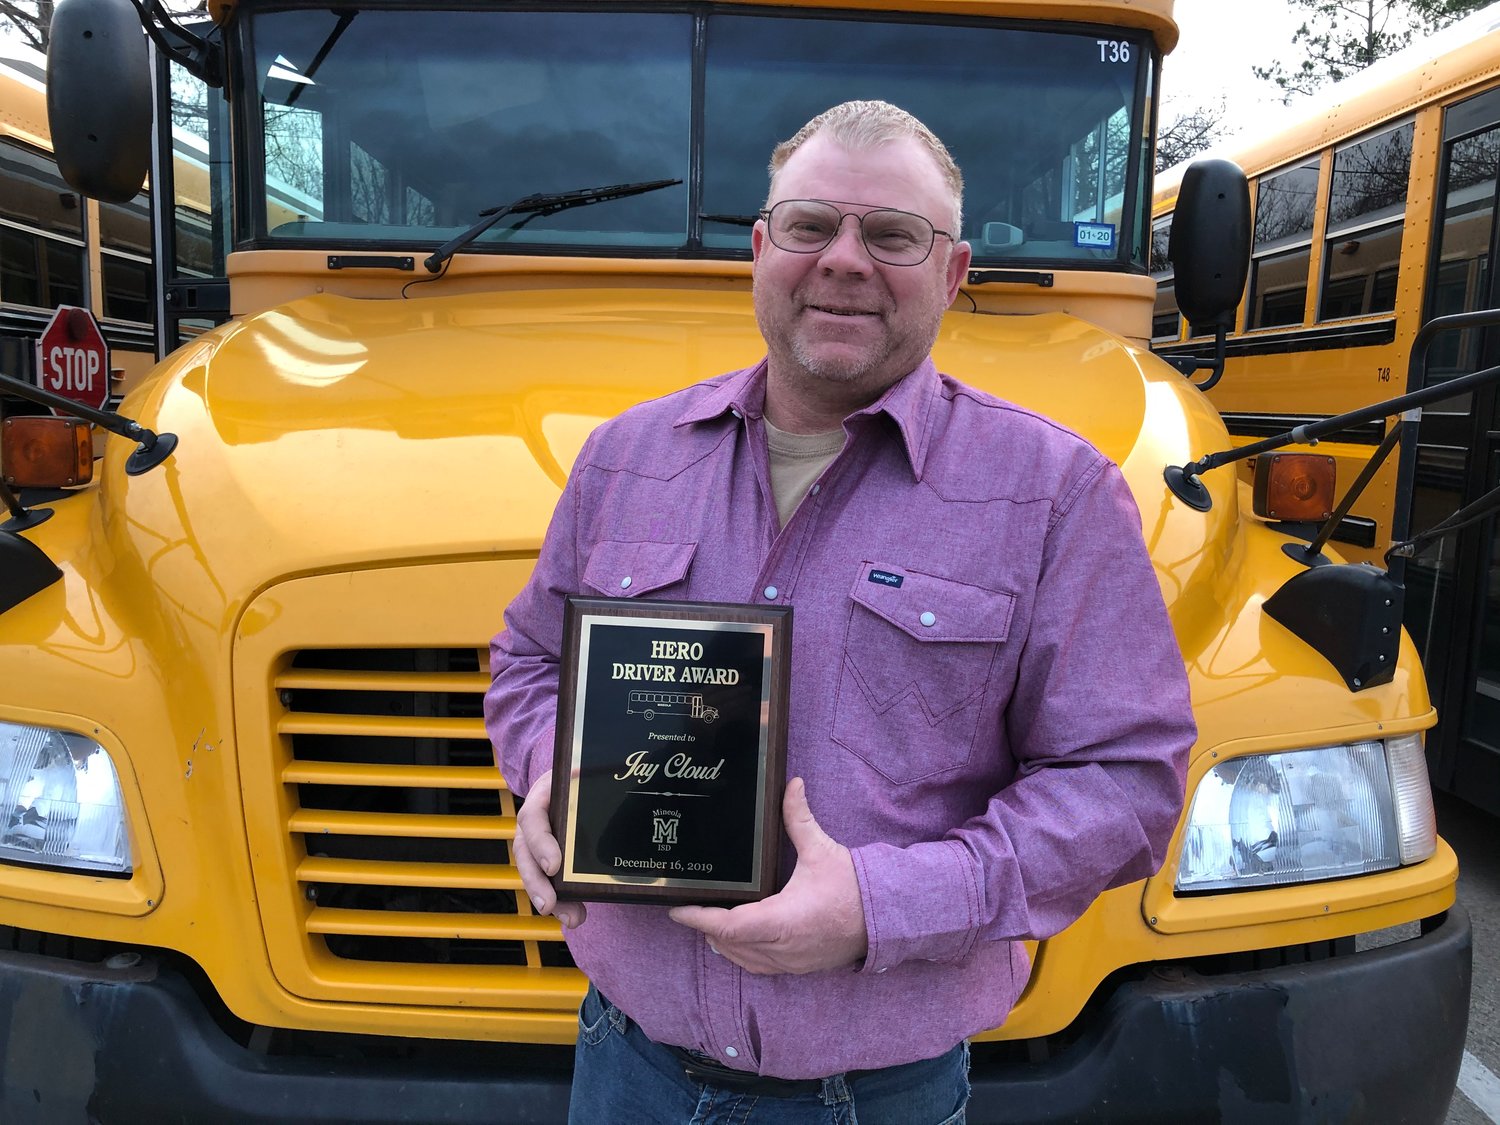 Mineola bus driver Jay Cloud was presented the Hero Driver Award last week by the MISD school board. (Monitor photo by Amanda Duncan)